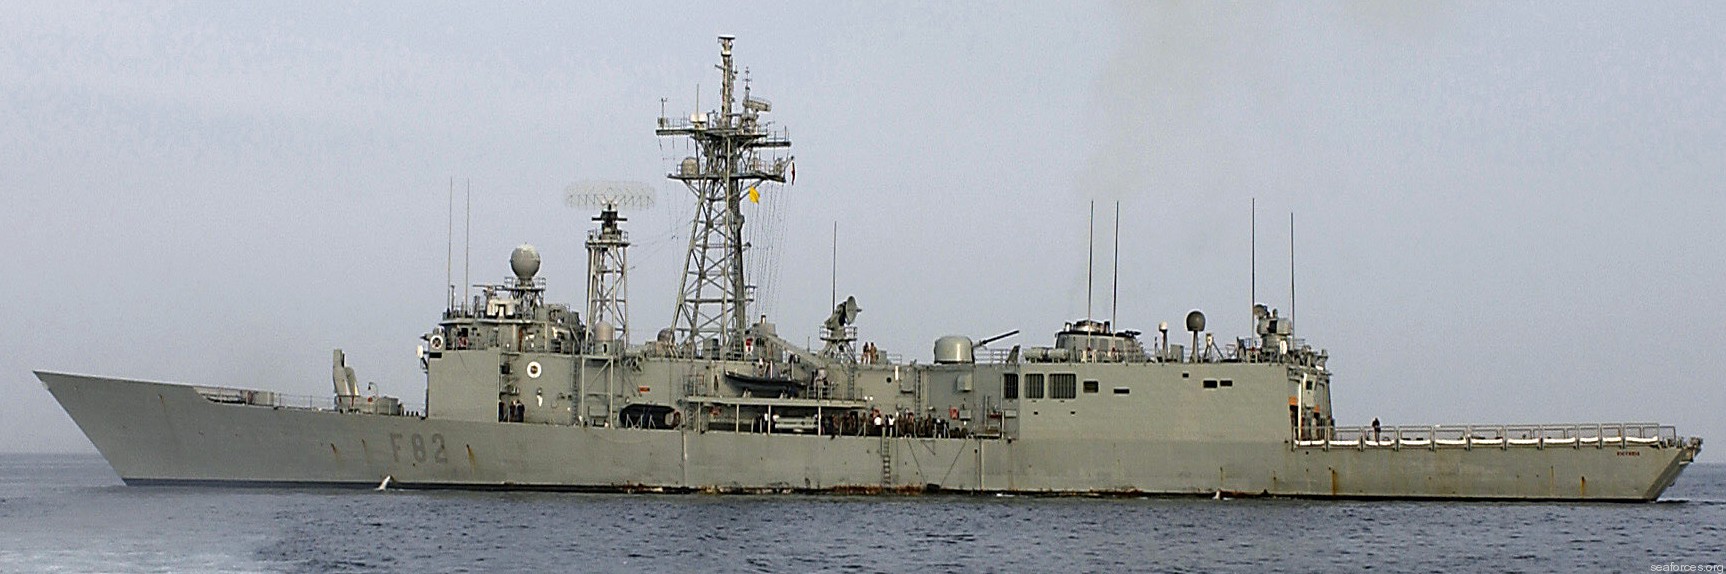 f-82 sps victoria f80 santa maria class guided missile frigate spanish navy 03